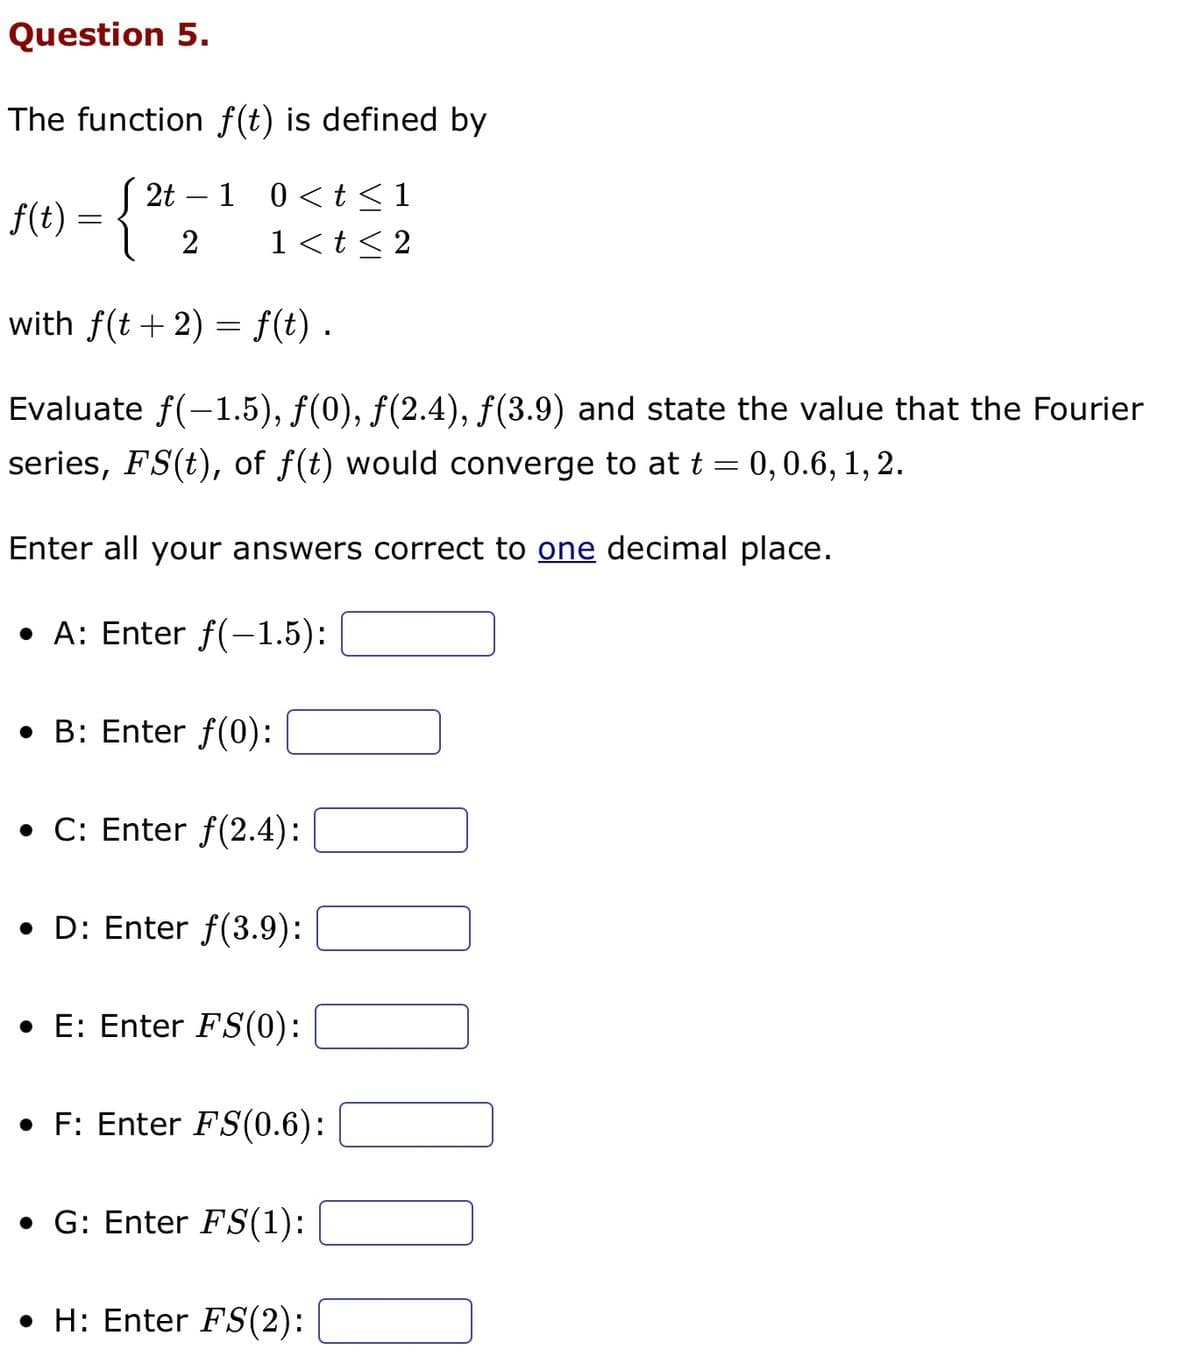 Question 5.
The function f(t) is defined by
1 0 < t ≤1
f(t) = {
1 < t < 2
with f(t + 2) = f(t) .
Evaluate f(-1.5), ƒ(0), ƒ(2.4), ƒ(3.9) and state the value that the Fourier
series, FS(t), of f(t) would converge to at t = 0, 0.6, 1, 2.
Enter all your answers correct to one decimal place.
• A: Enter f(-1.5):
• B: Enter f(0):
2t
2
C: Enter f(2.4):
D: Enter f(3.9):
• E: Enter FS(0):
F: Enter FS(0.6):
• G: Enter FS(1):
• H: Enter FS(2):